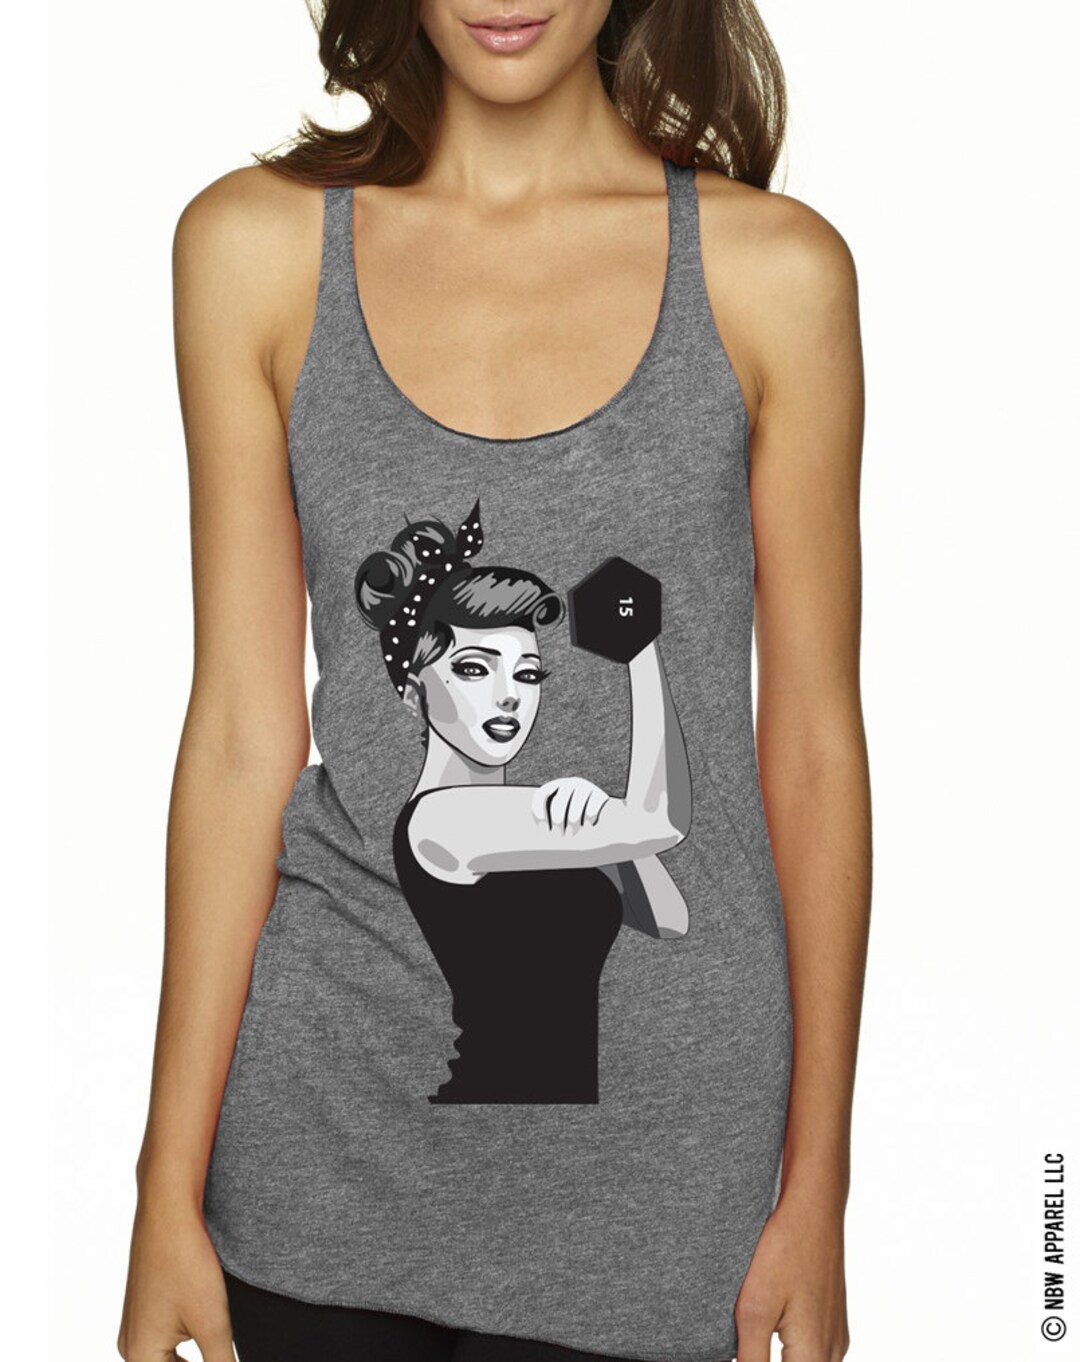 MODERN ROSIE the RIVETER Workout Tank Top Gray Workout - Etsy